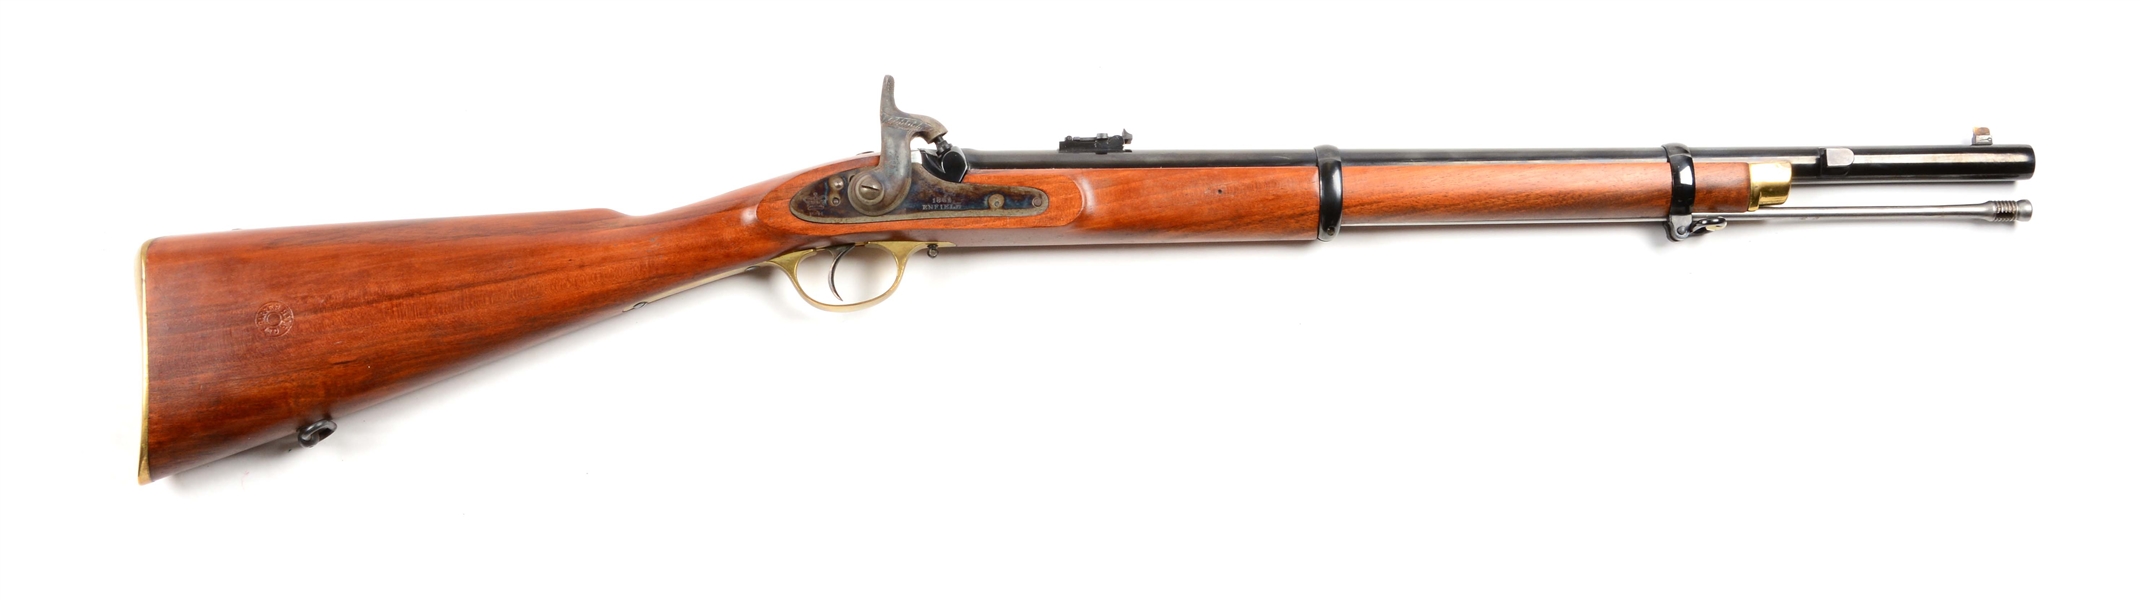 (A) PARKER HALE 1861 ENFIELD .58 CALIBER PERCUSSION MUSKETOON.